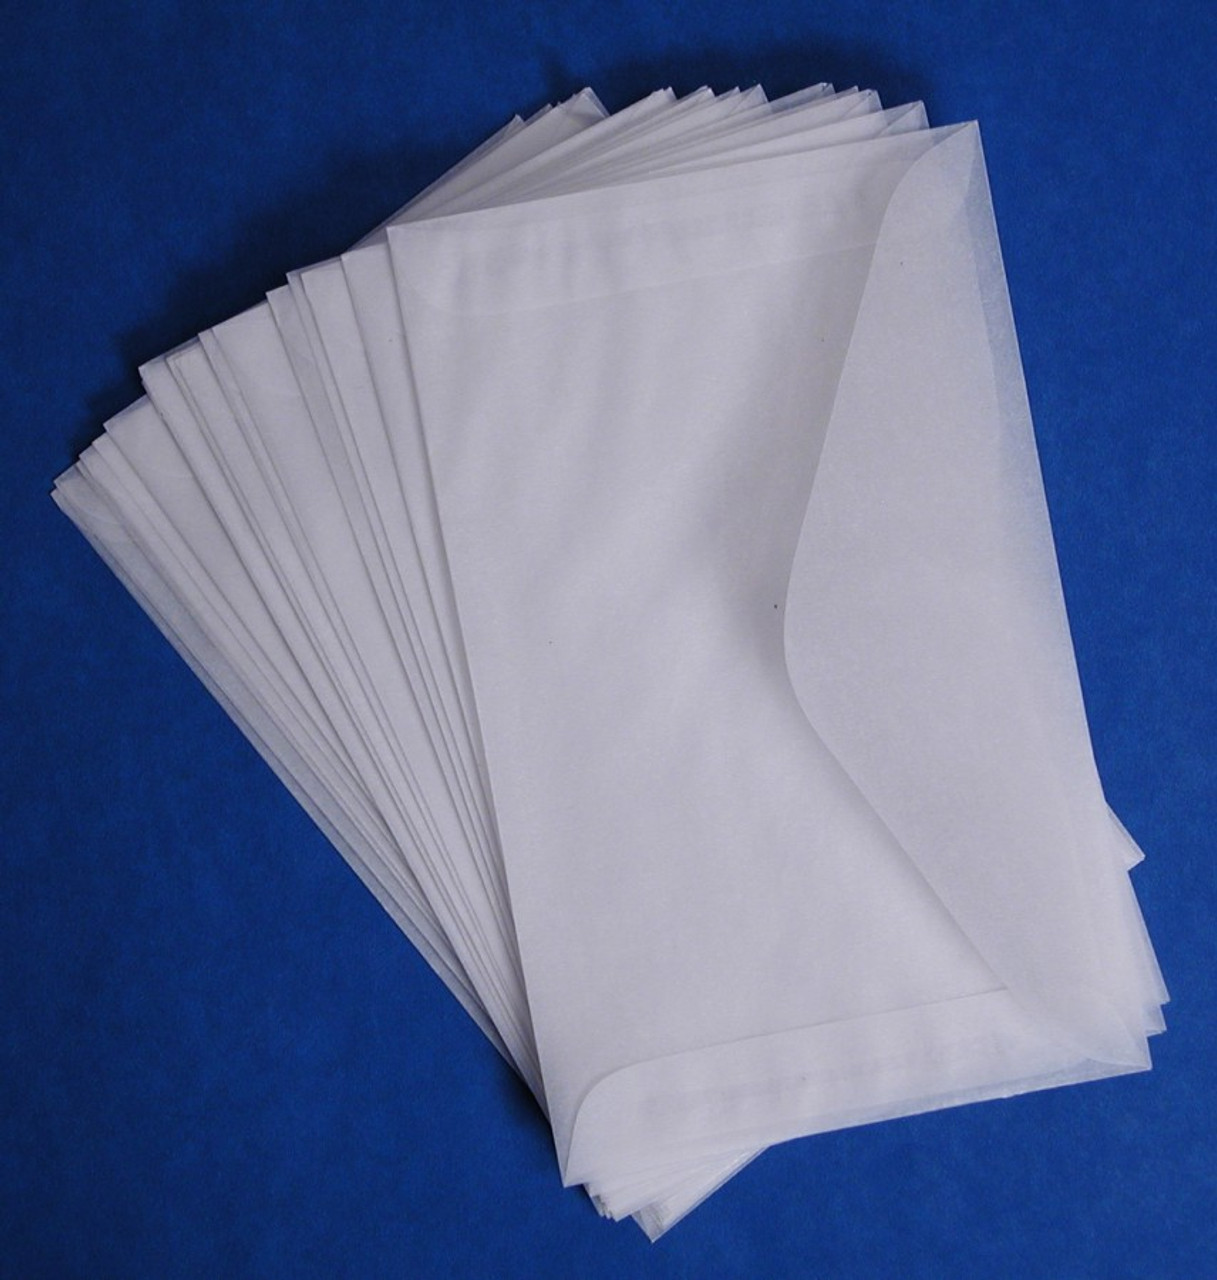 100 Glassine Top Opening Envelopes 2 1/2 x 4 1/4 Inches (No.3